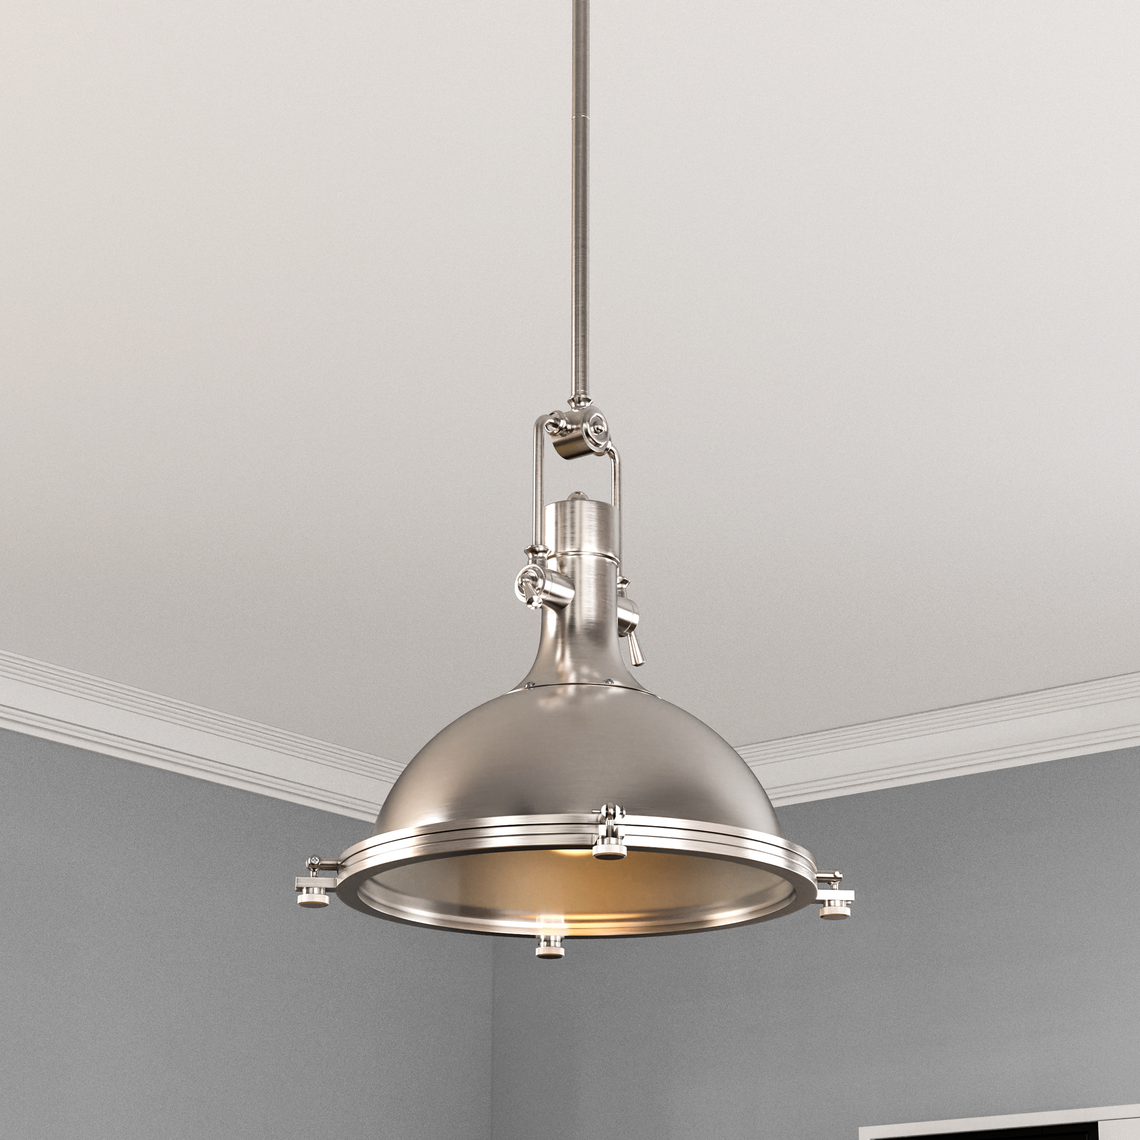 Satin Nickel Finish, Industrial Pendant Light Fixture, Includes Extension Rods 1x6